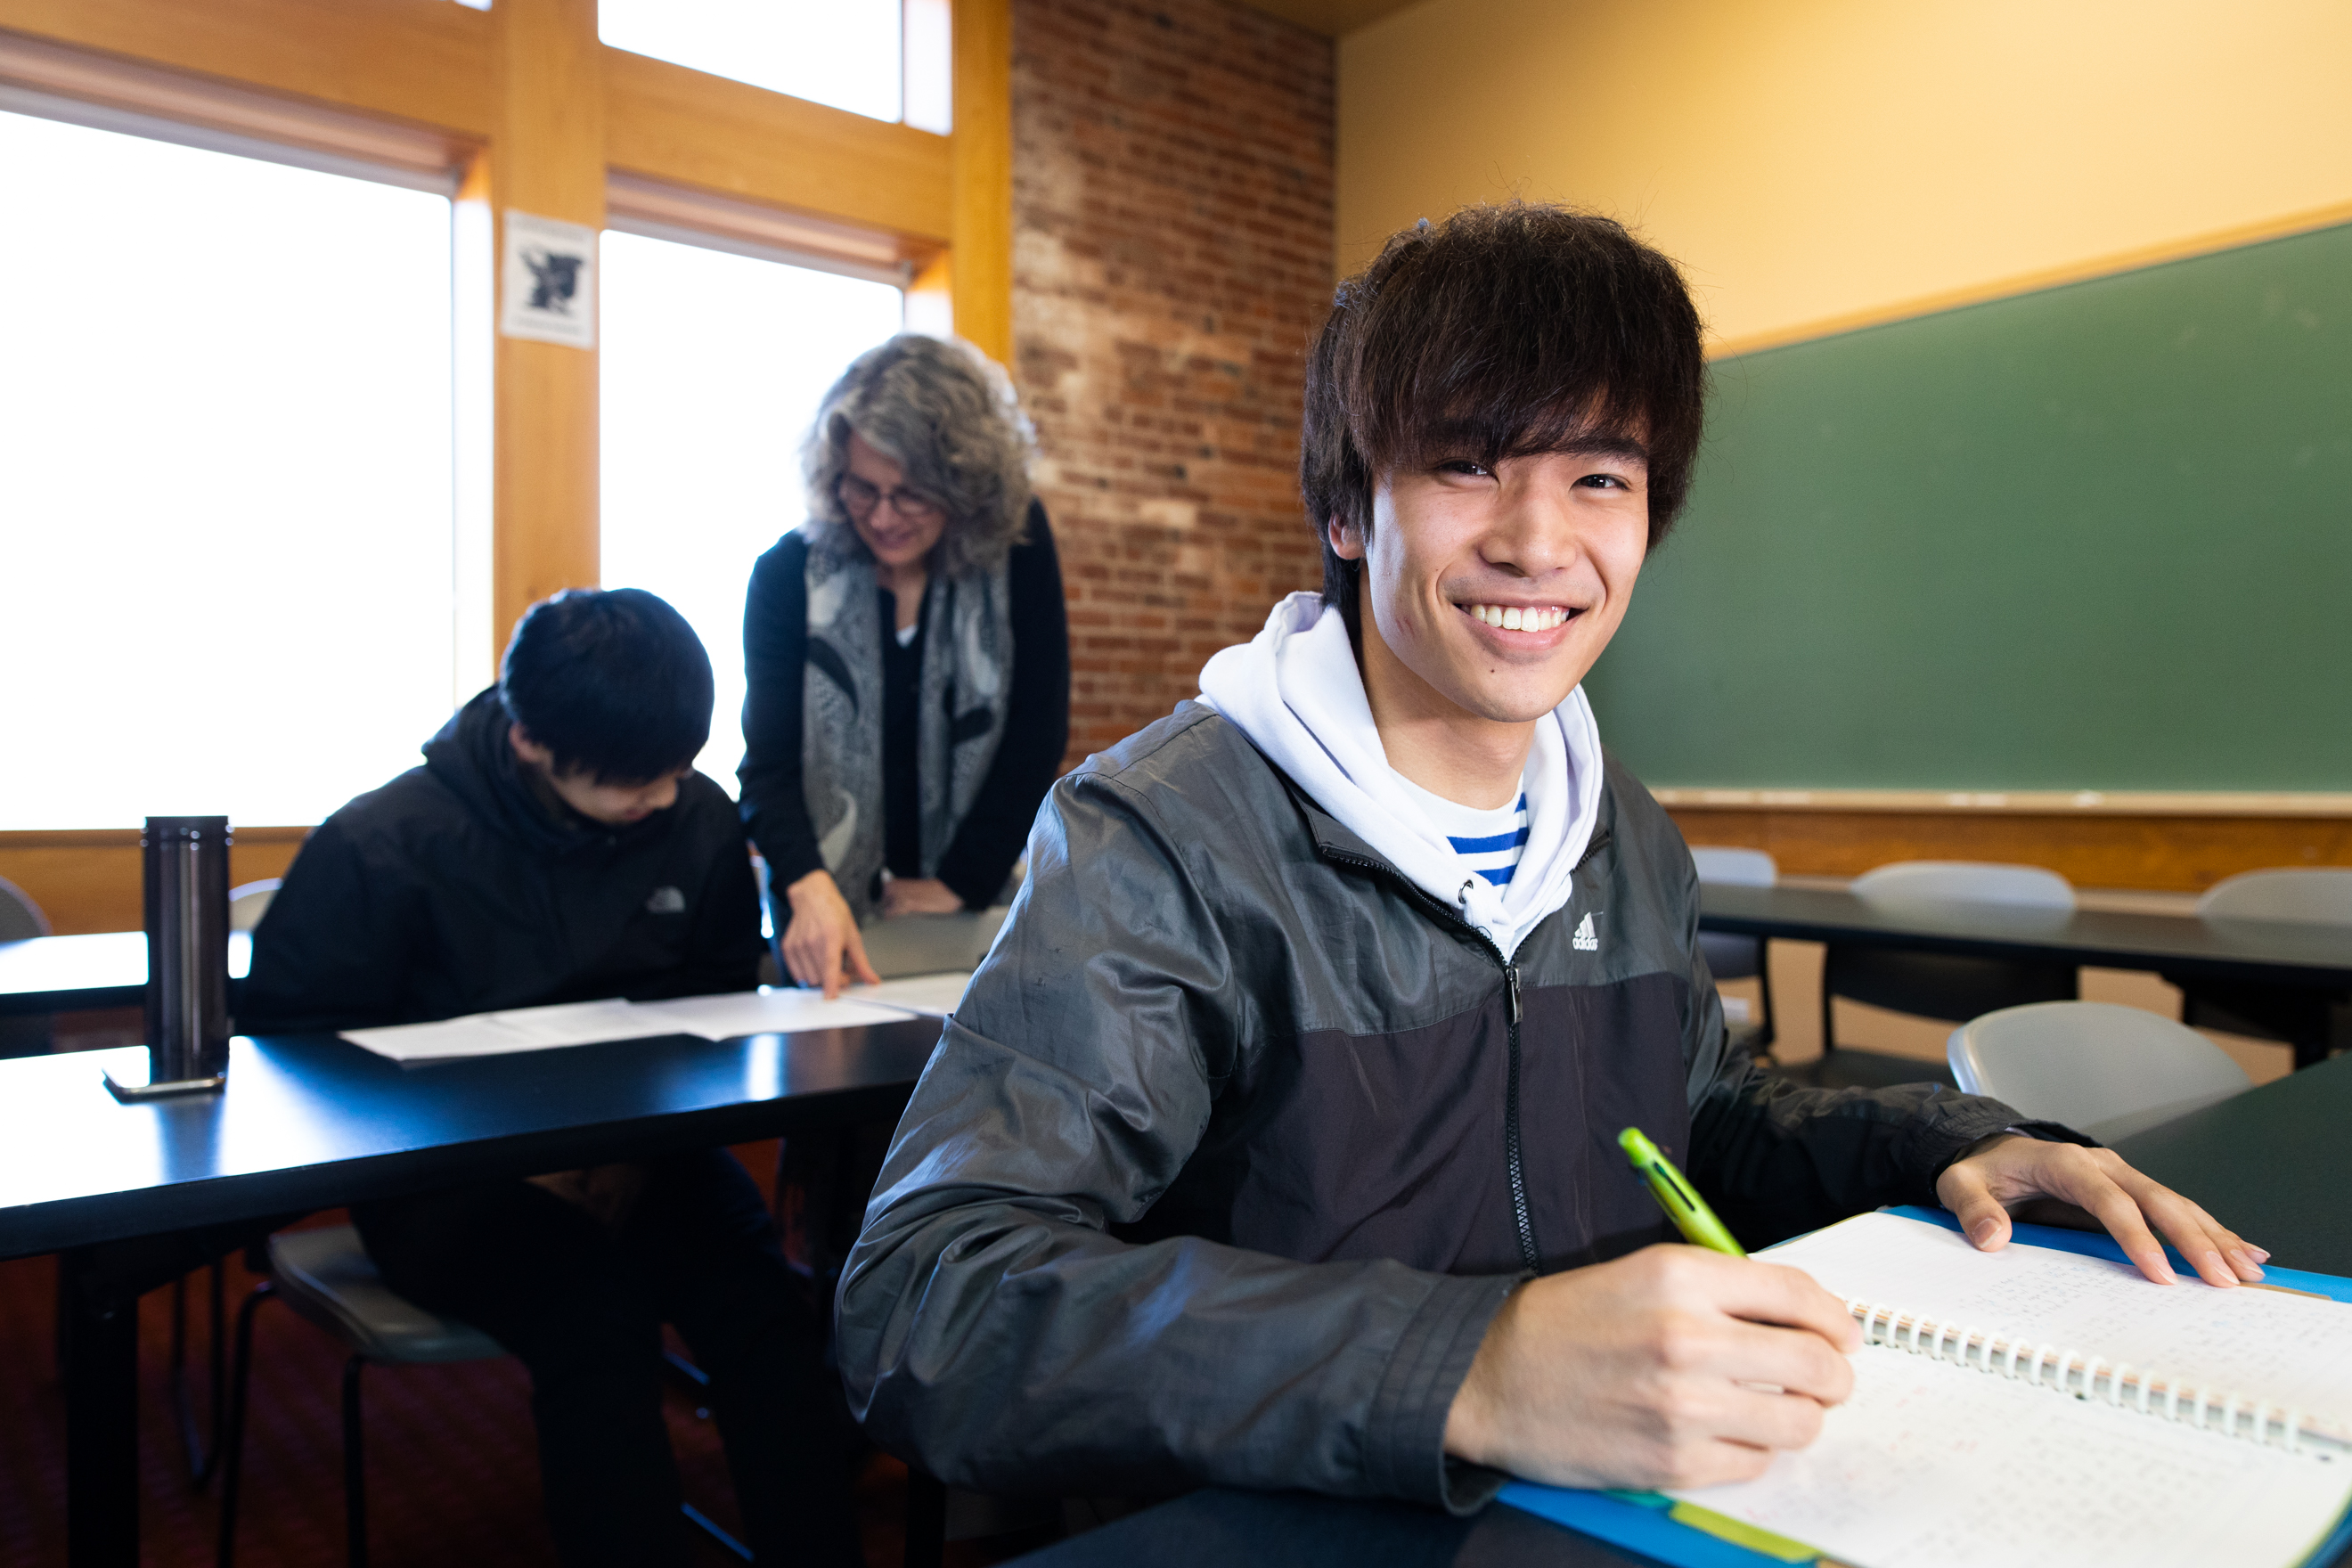 A student in a classroom looks into the camera between taking notes during a class.